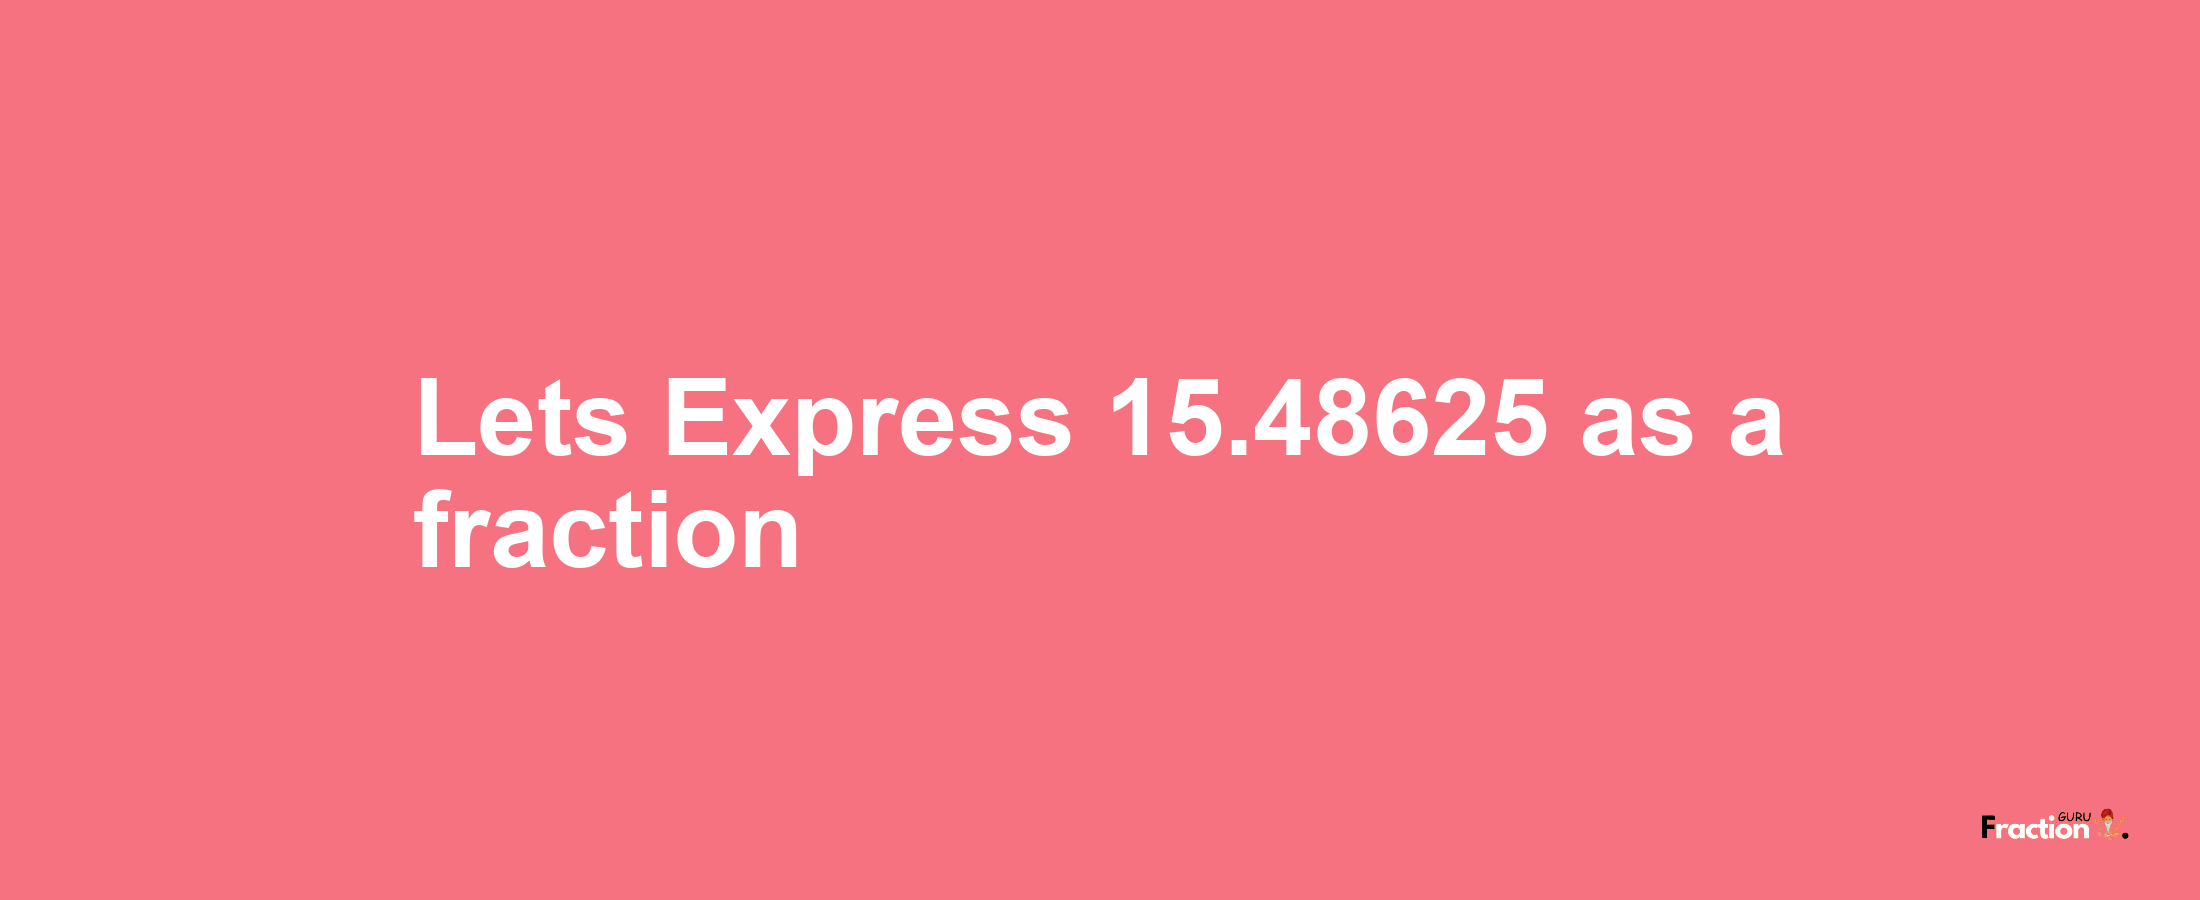 Lets Express 15.48625 as afraction